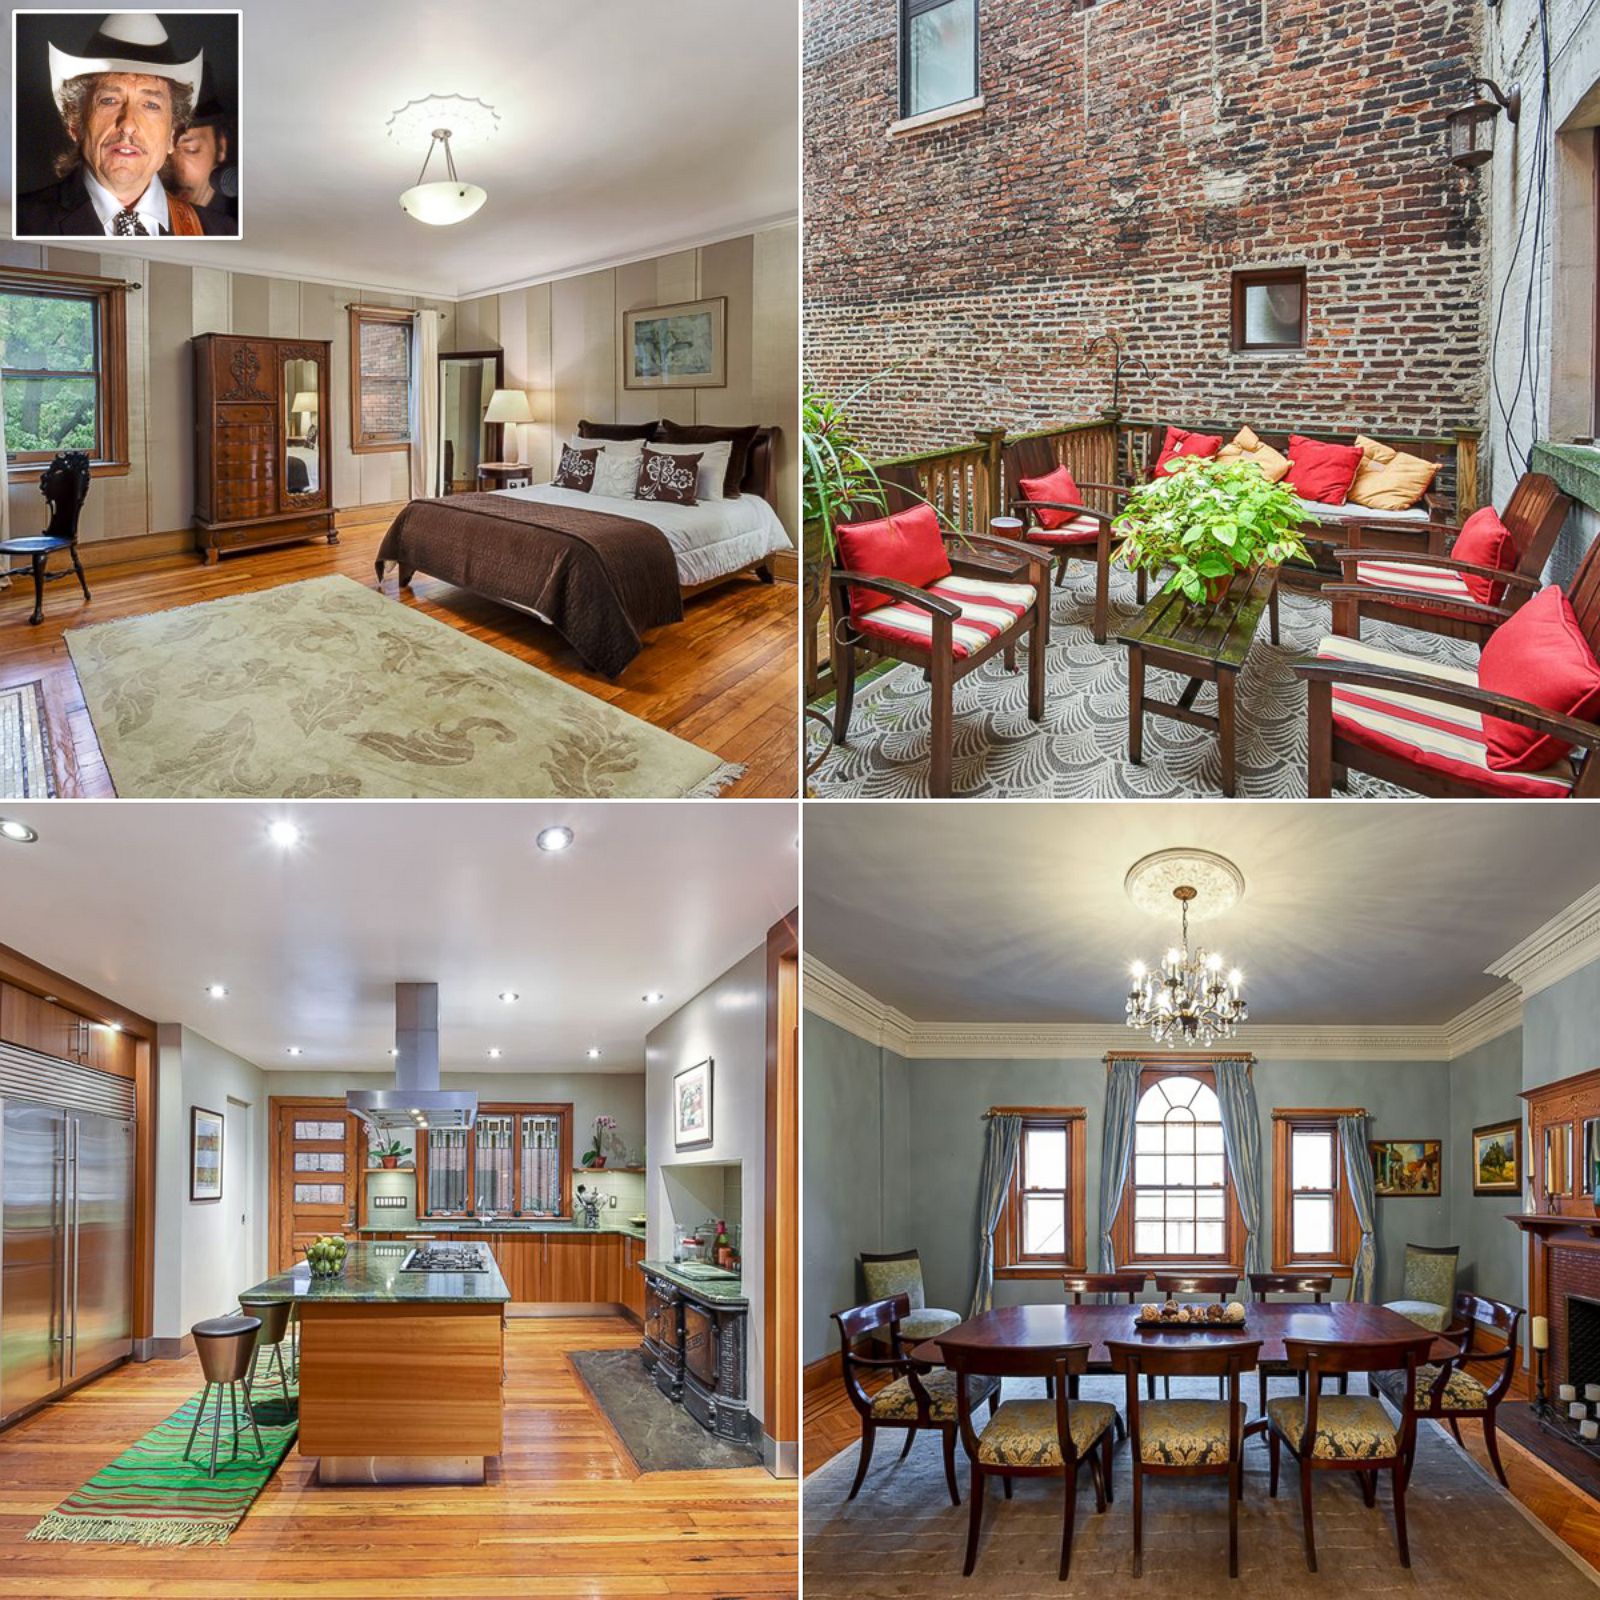 Bob Dylan's former Harlem townhouse listed for $3.595 million Picture